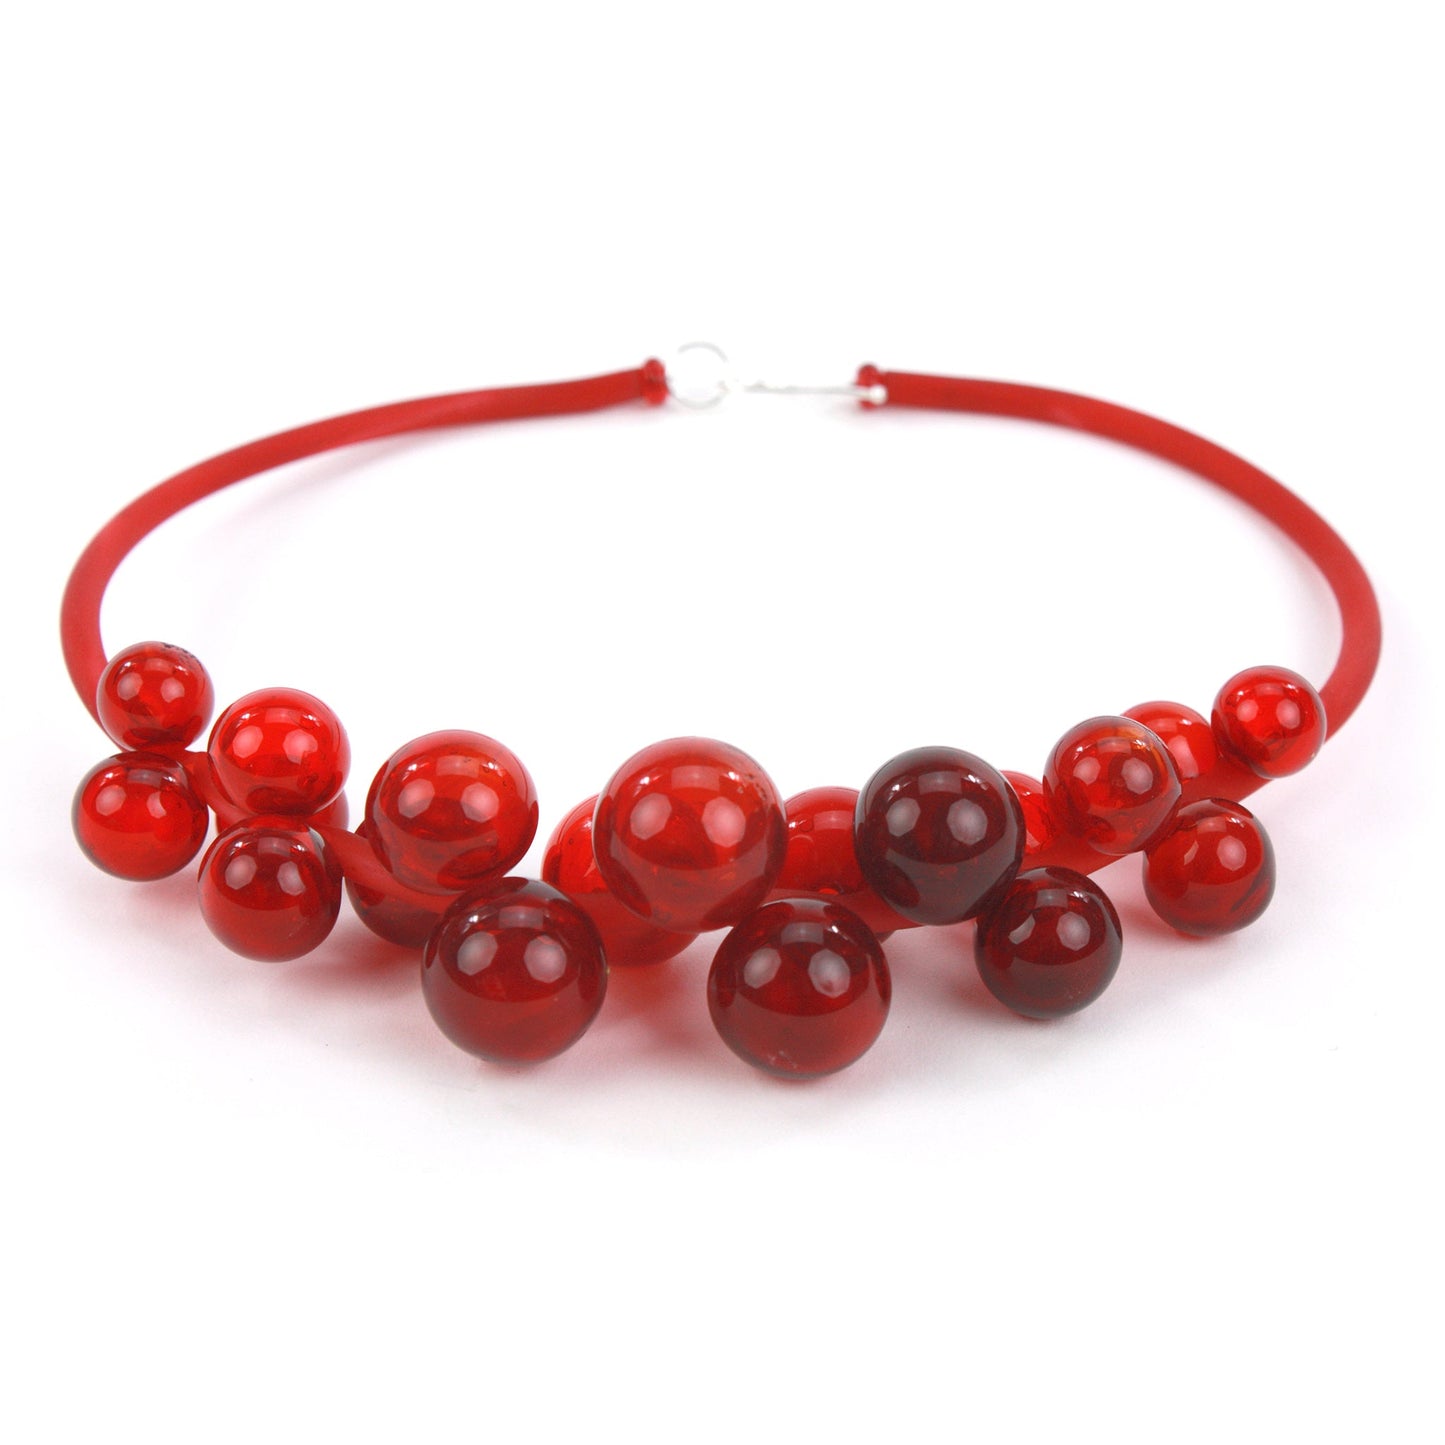 Chroma Bolla Necklace in Red